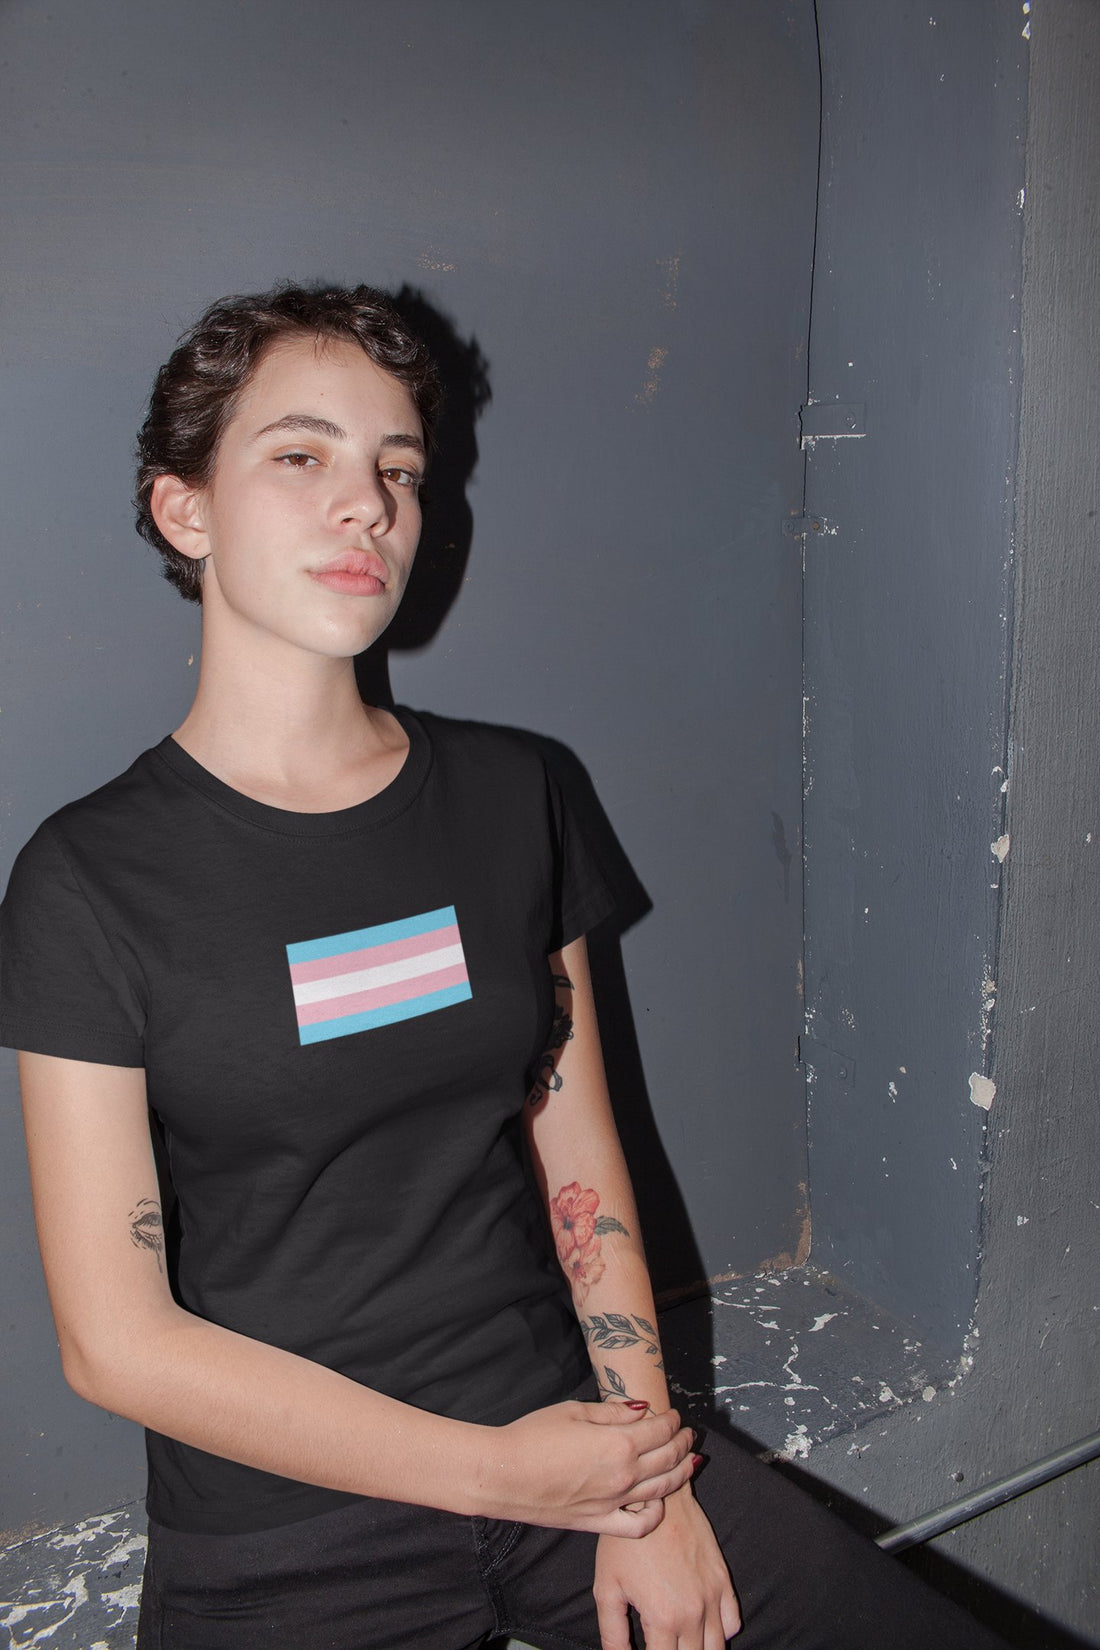  Trans Pride Shirts | QueerlyDesigns